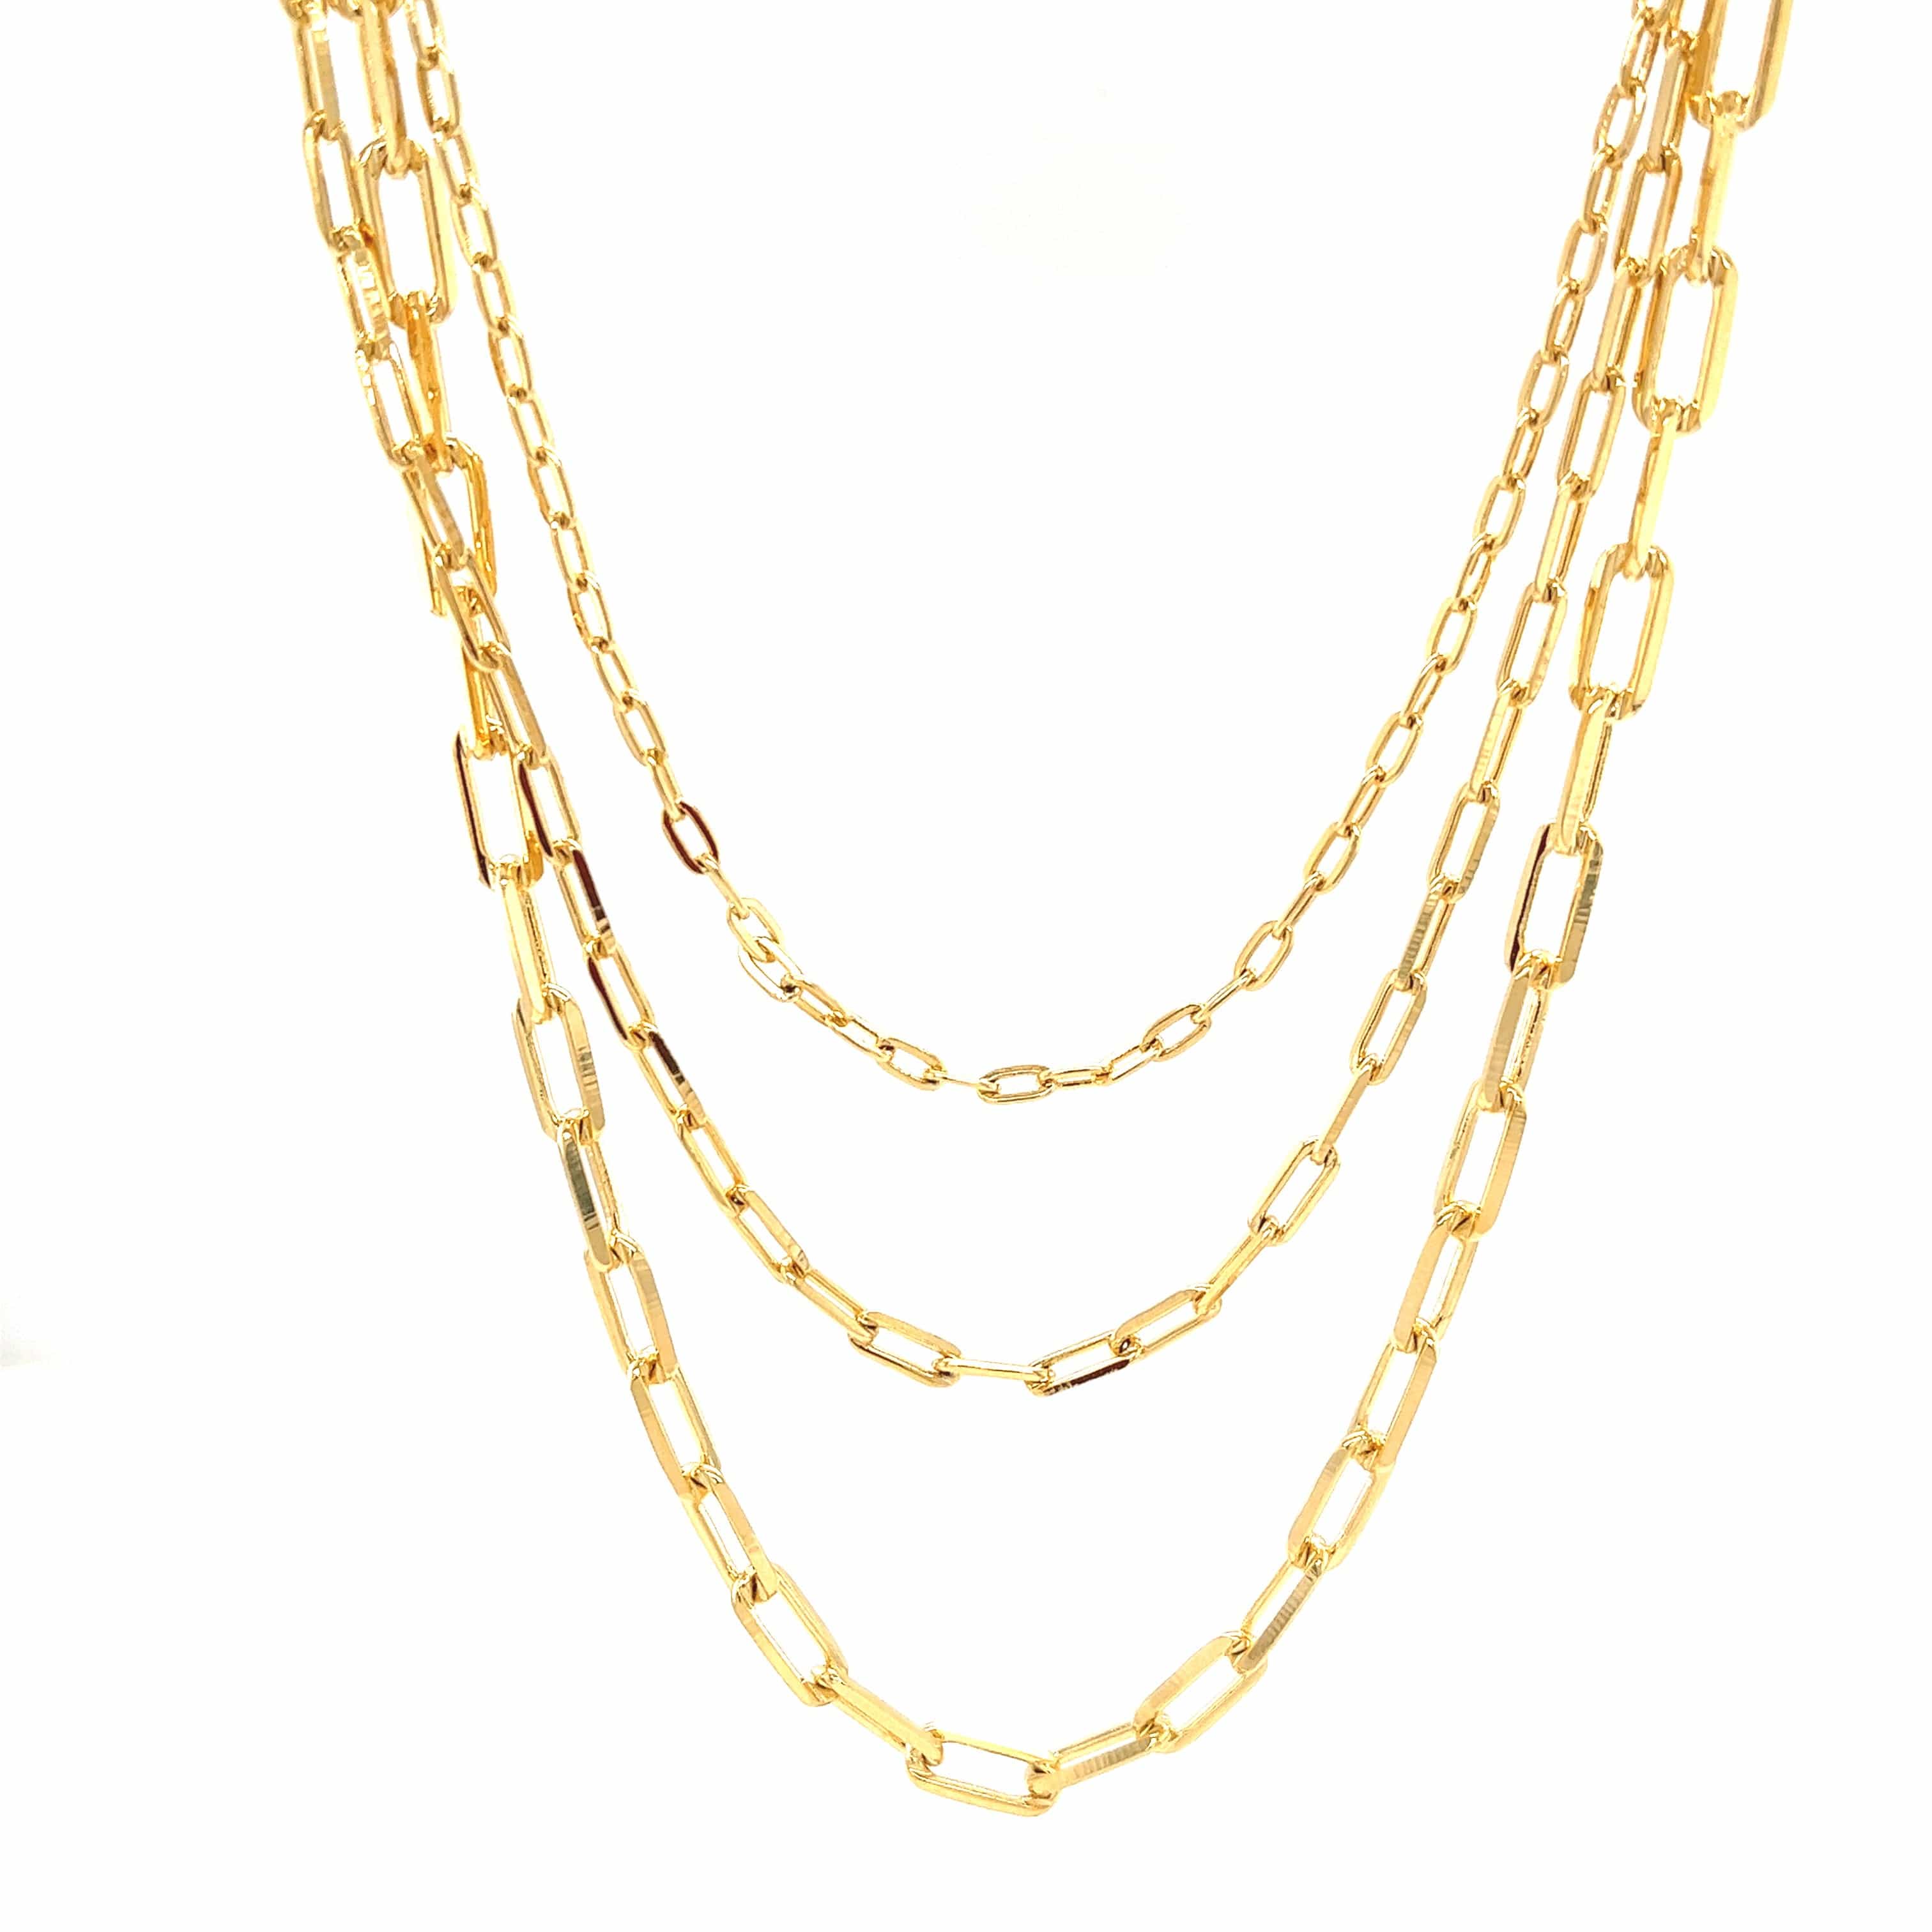 Paige Harper 14k Gold Plated Layered Curb Link & Paper Clip Link Chain  Necklace